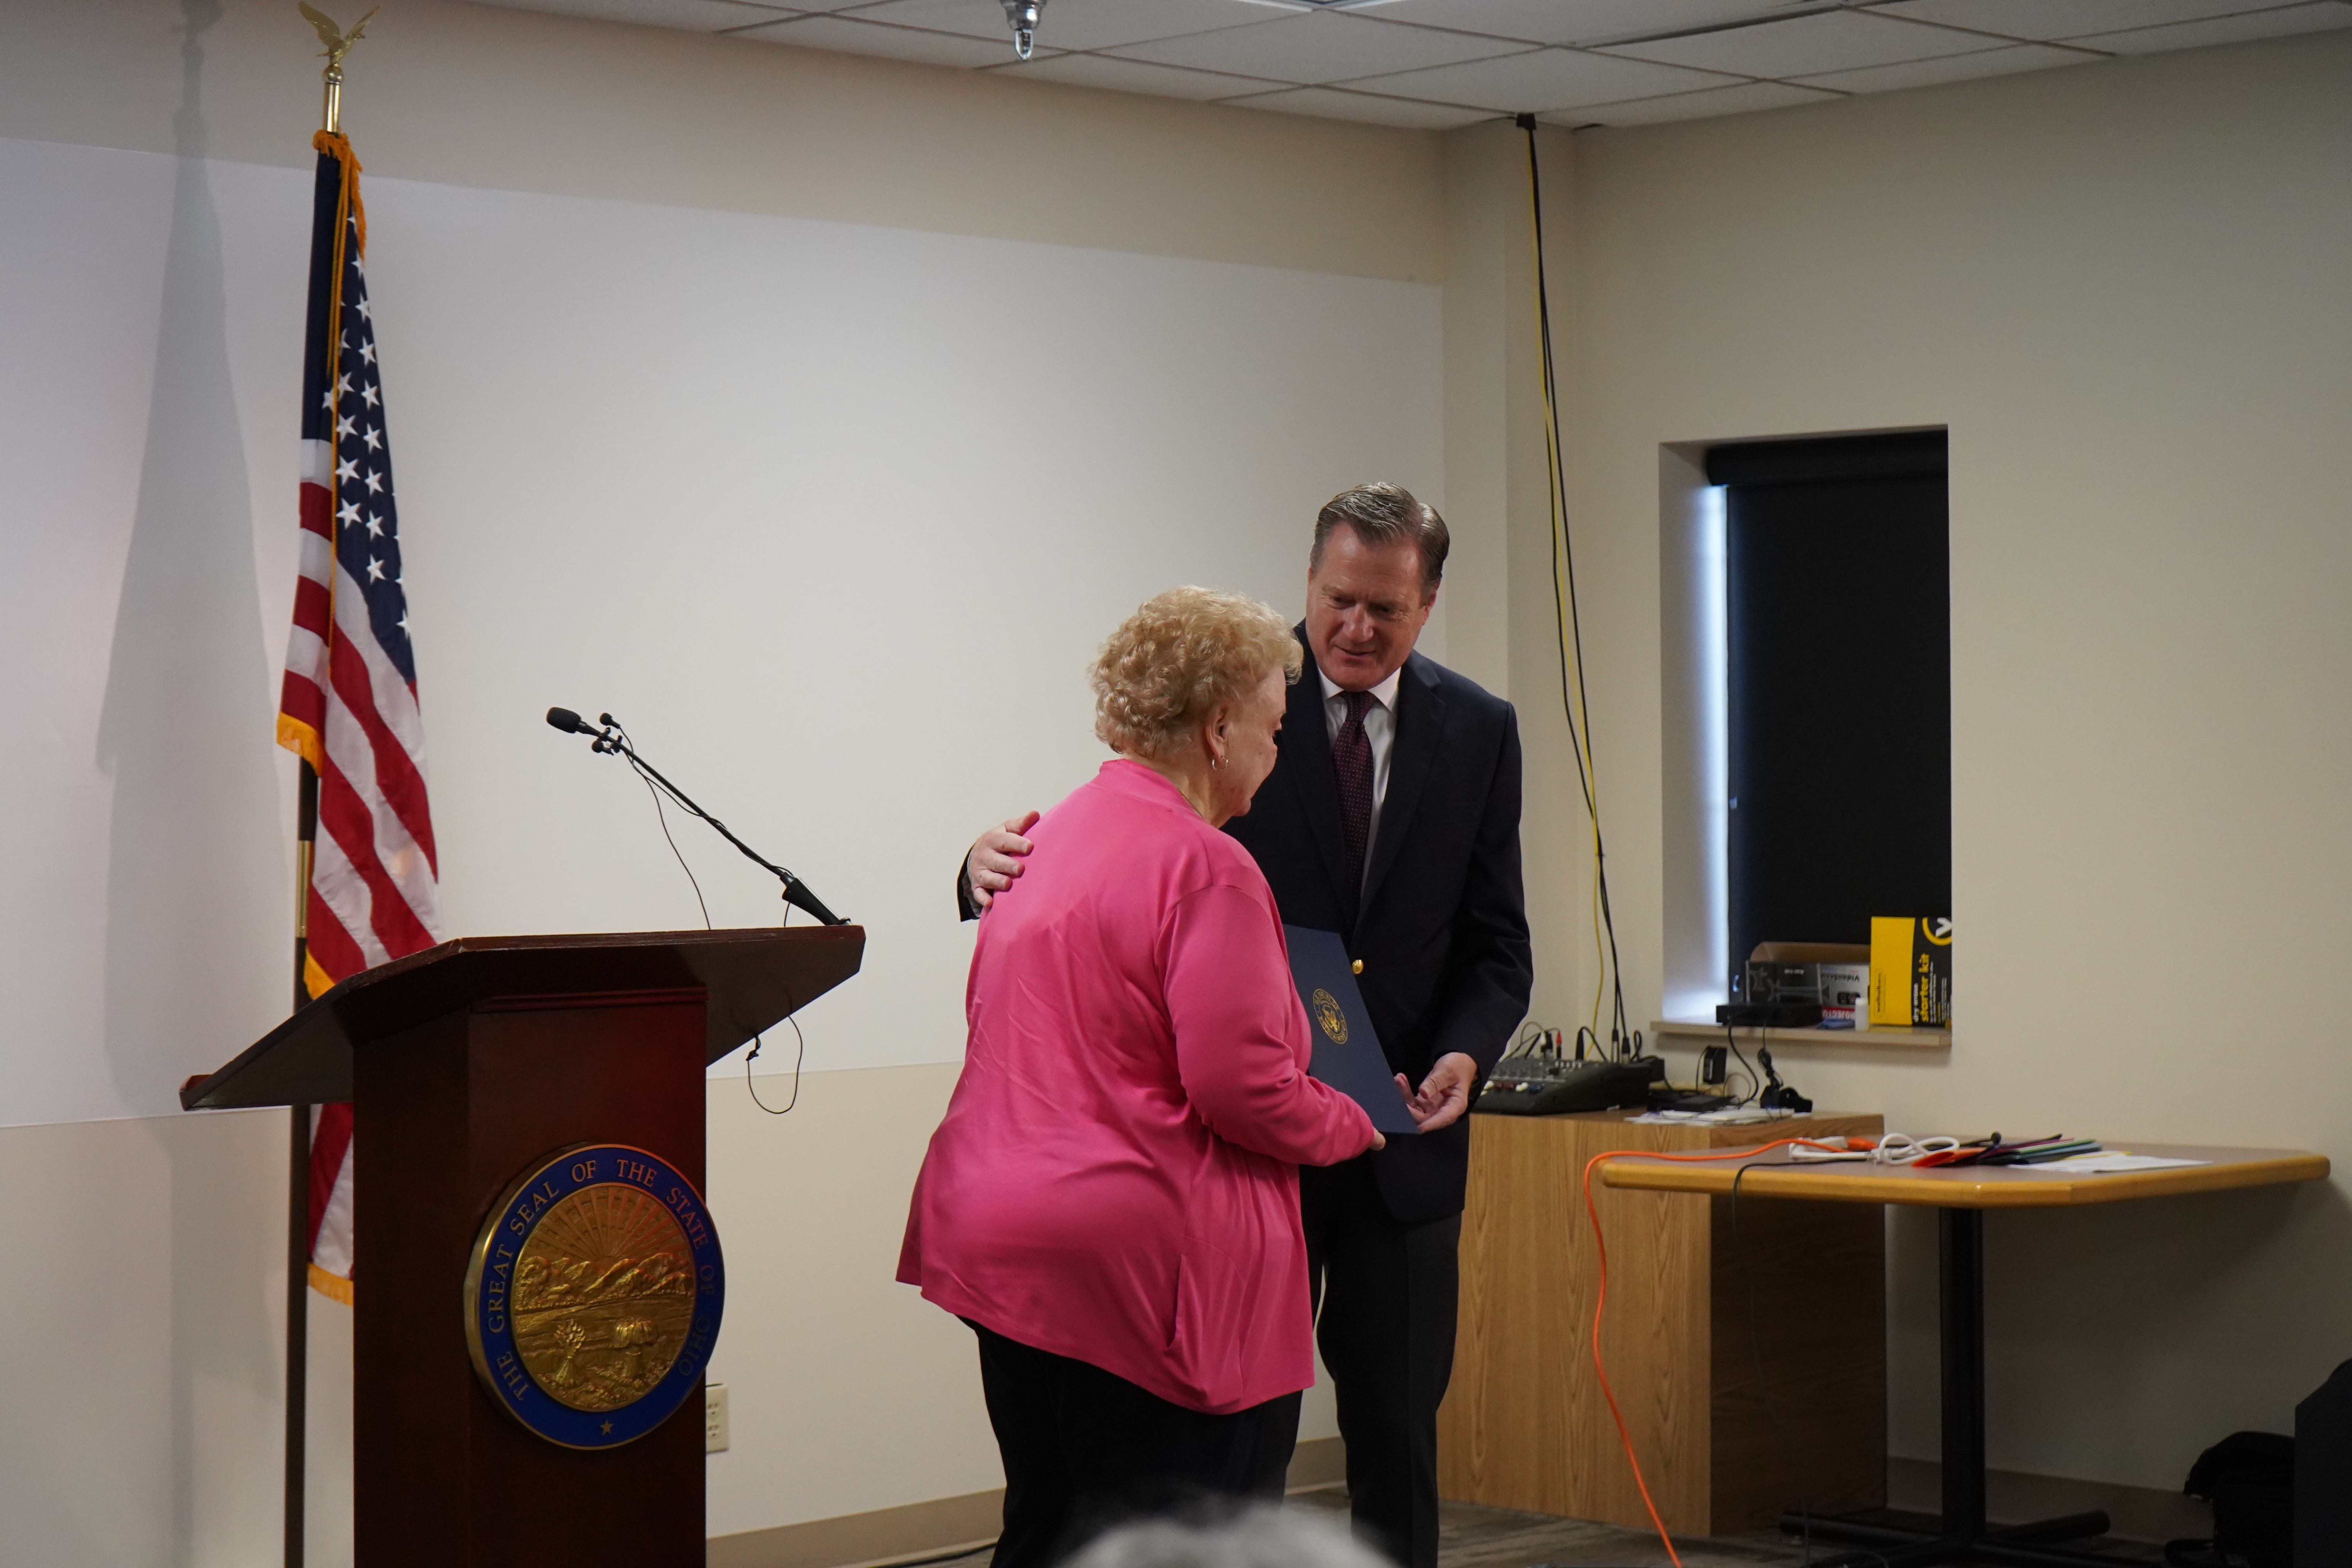 Congressman Mike Turner presents Mayor Church's wife, Judi Church, with a copy of the tribute he inserted into the Congressional Record about Mayor Dick Church.